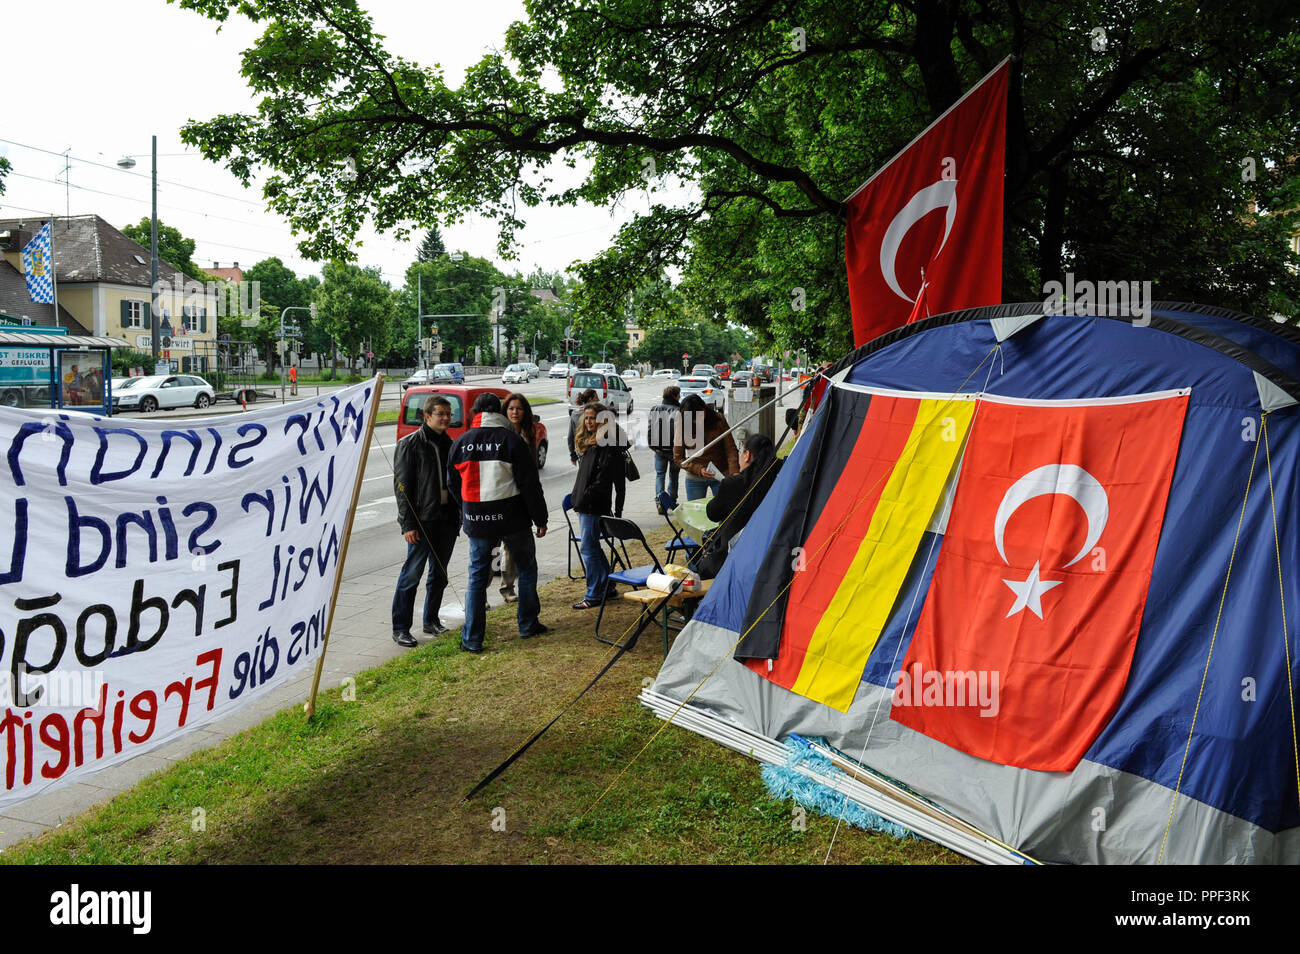 Turkish protesters camp in front of the Consulate General of the Republic of Turkey in the Menzingerstrasse 3 in Nymphenburg, to show their solidarity with the demonstrators in Istanbul. Stock Photo